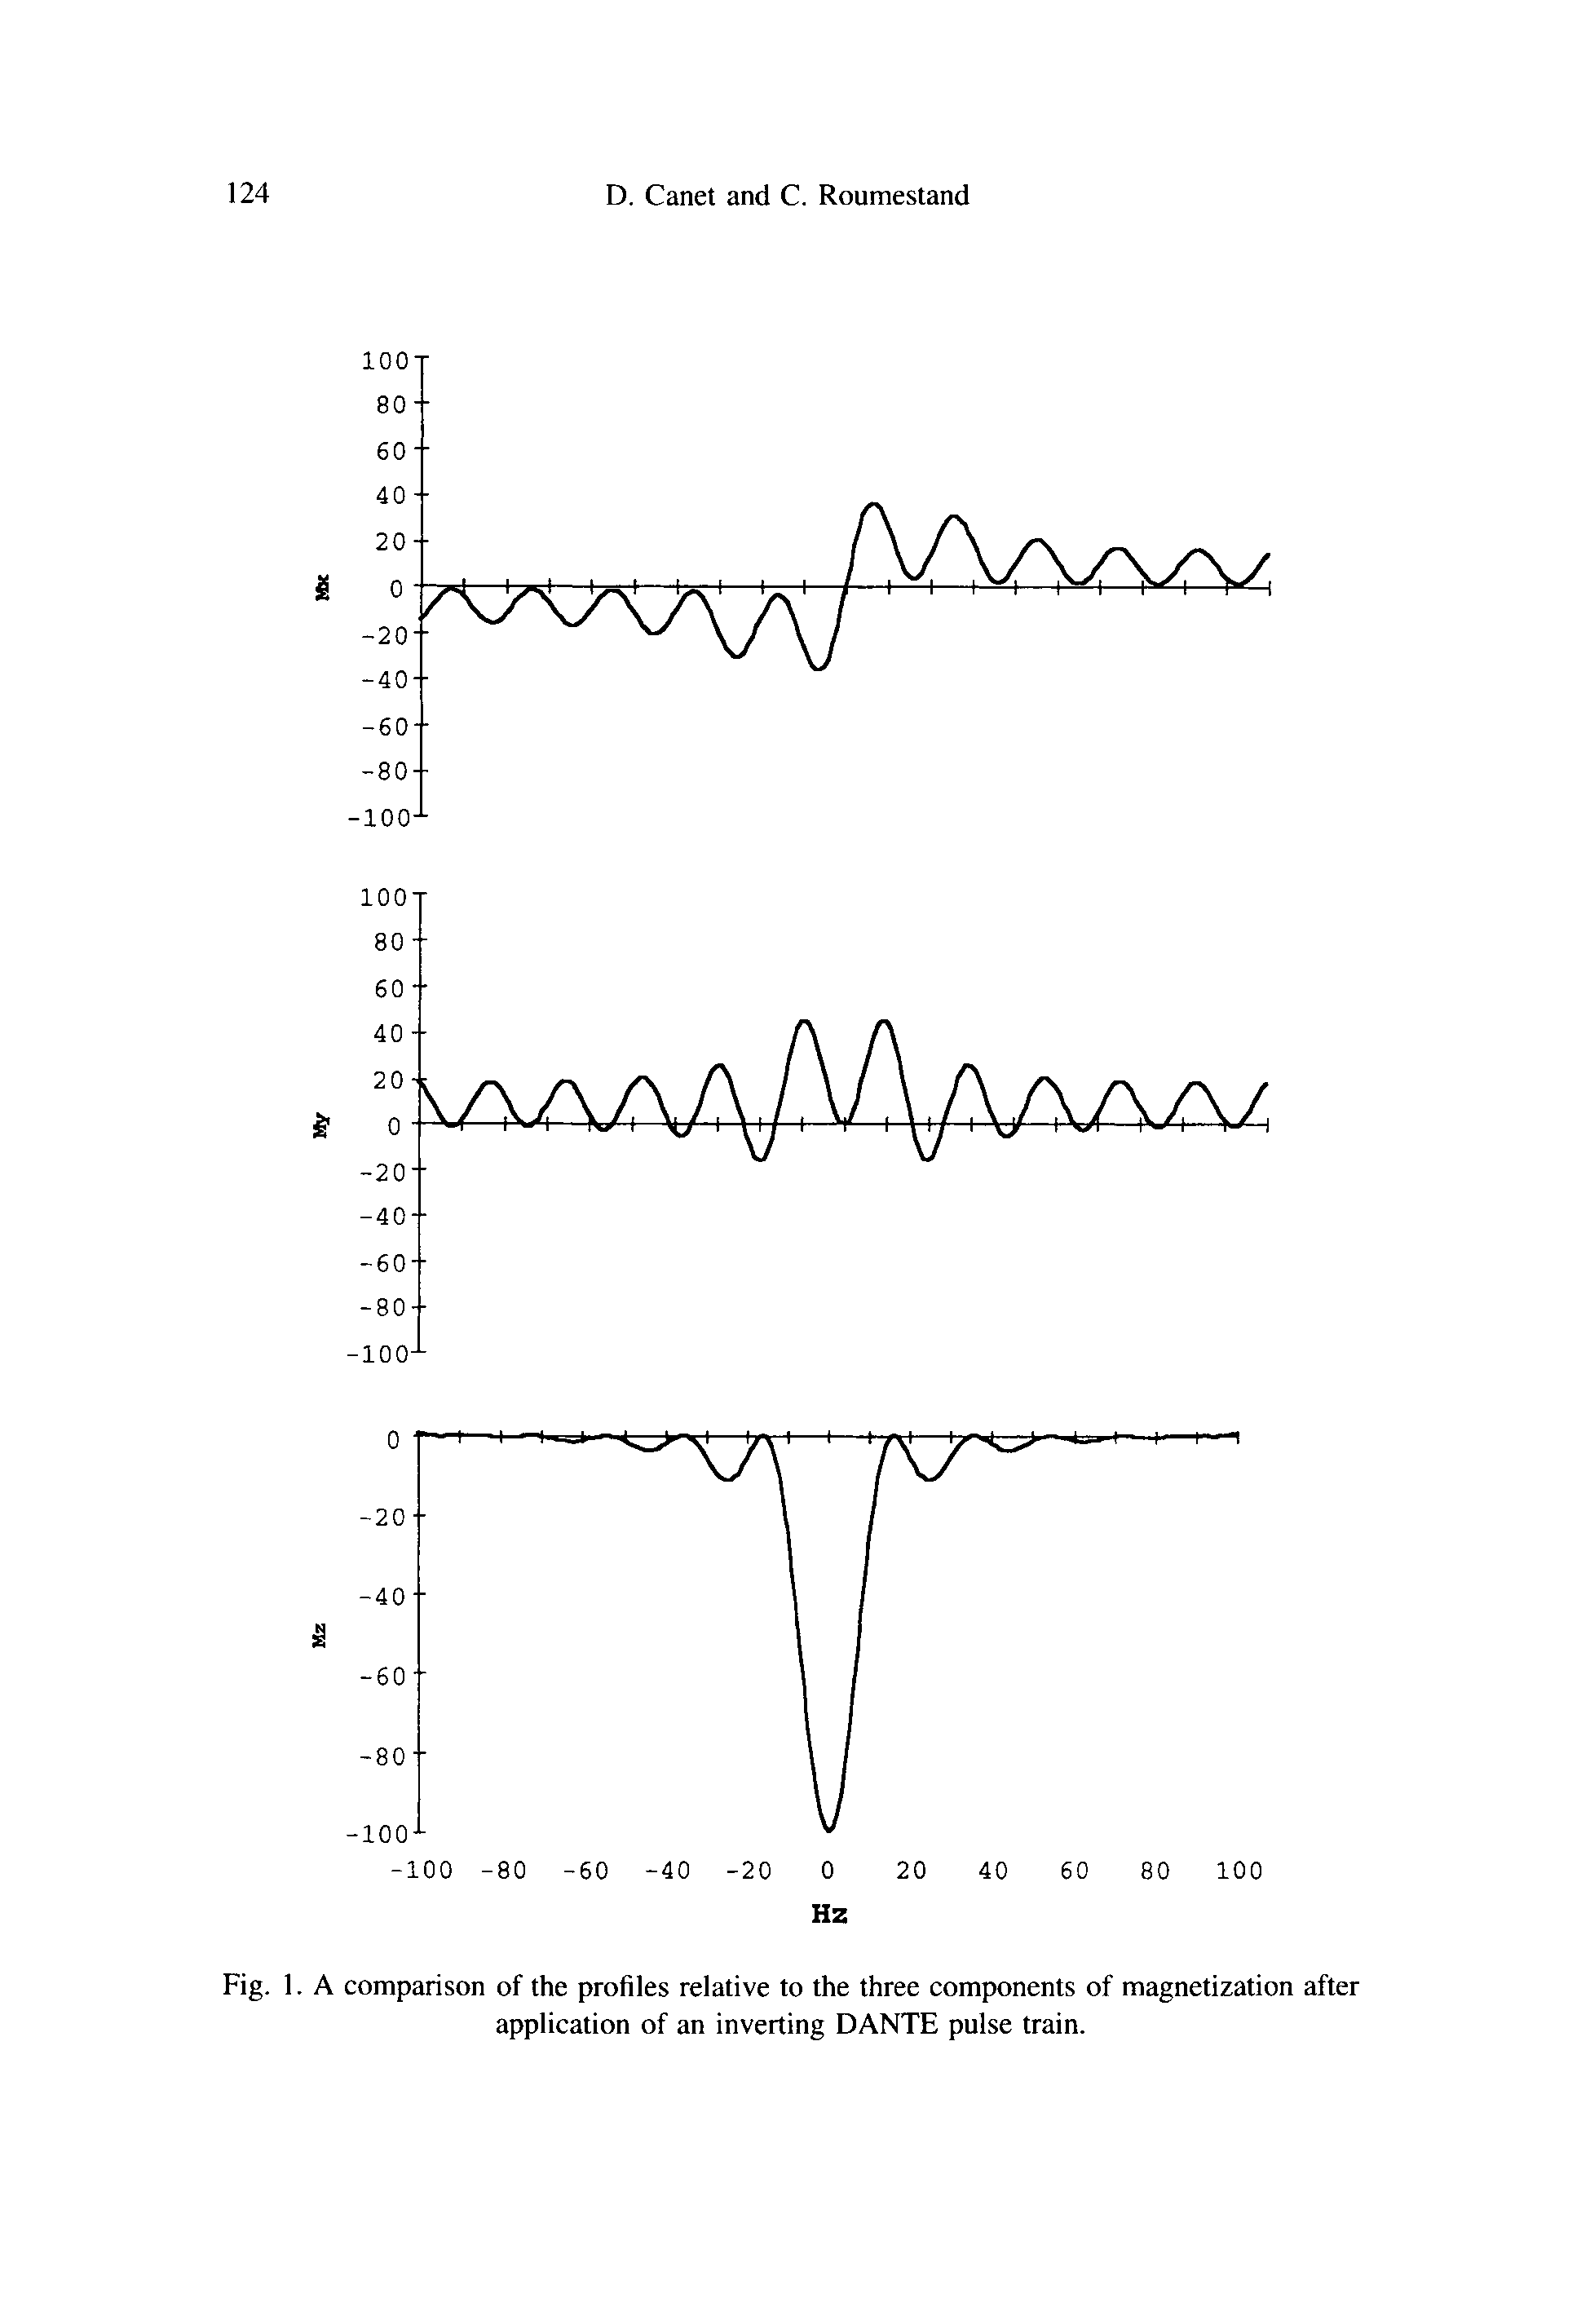 Fig. 1. A comparison of the profiles relative to the three components of magnetization after application of an inverting DANTE pulse train.